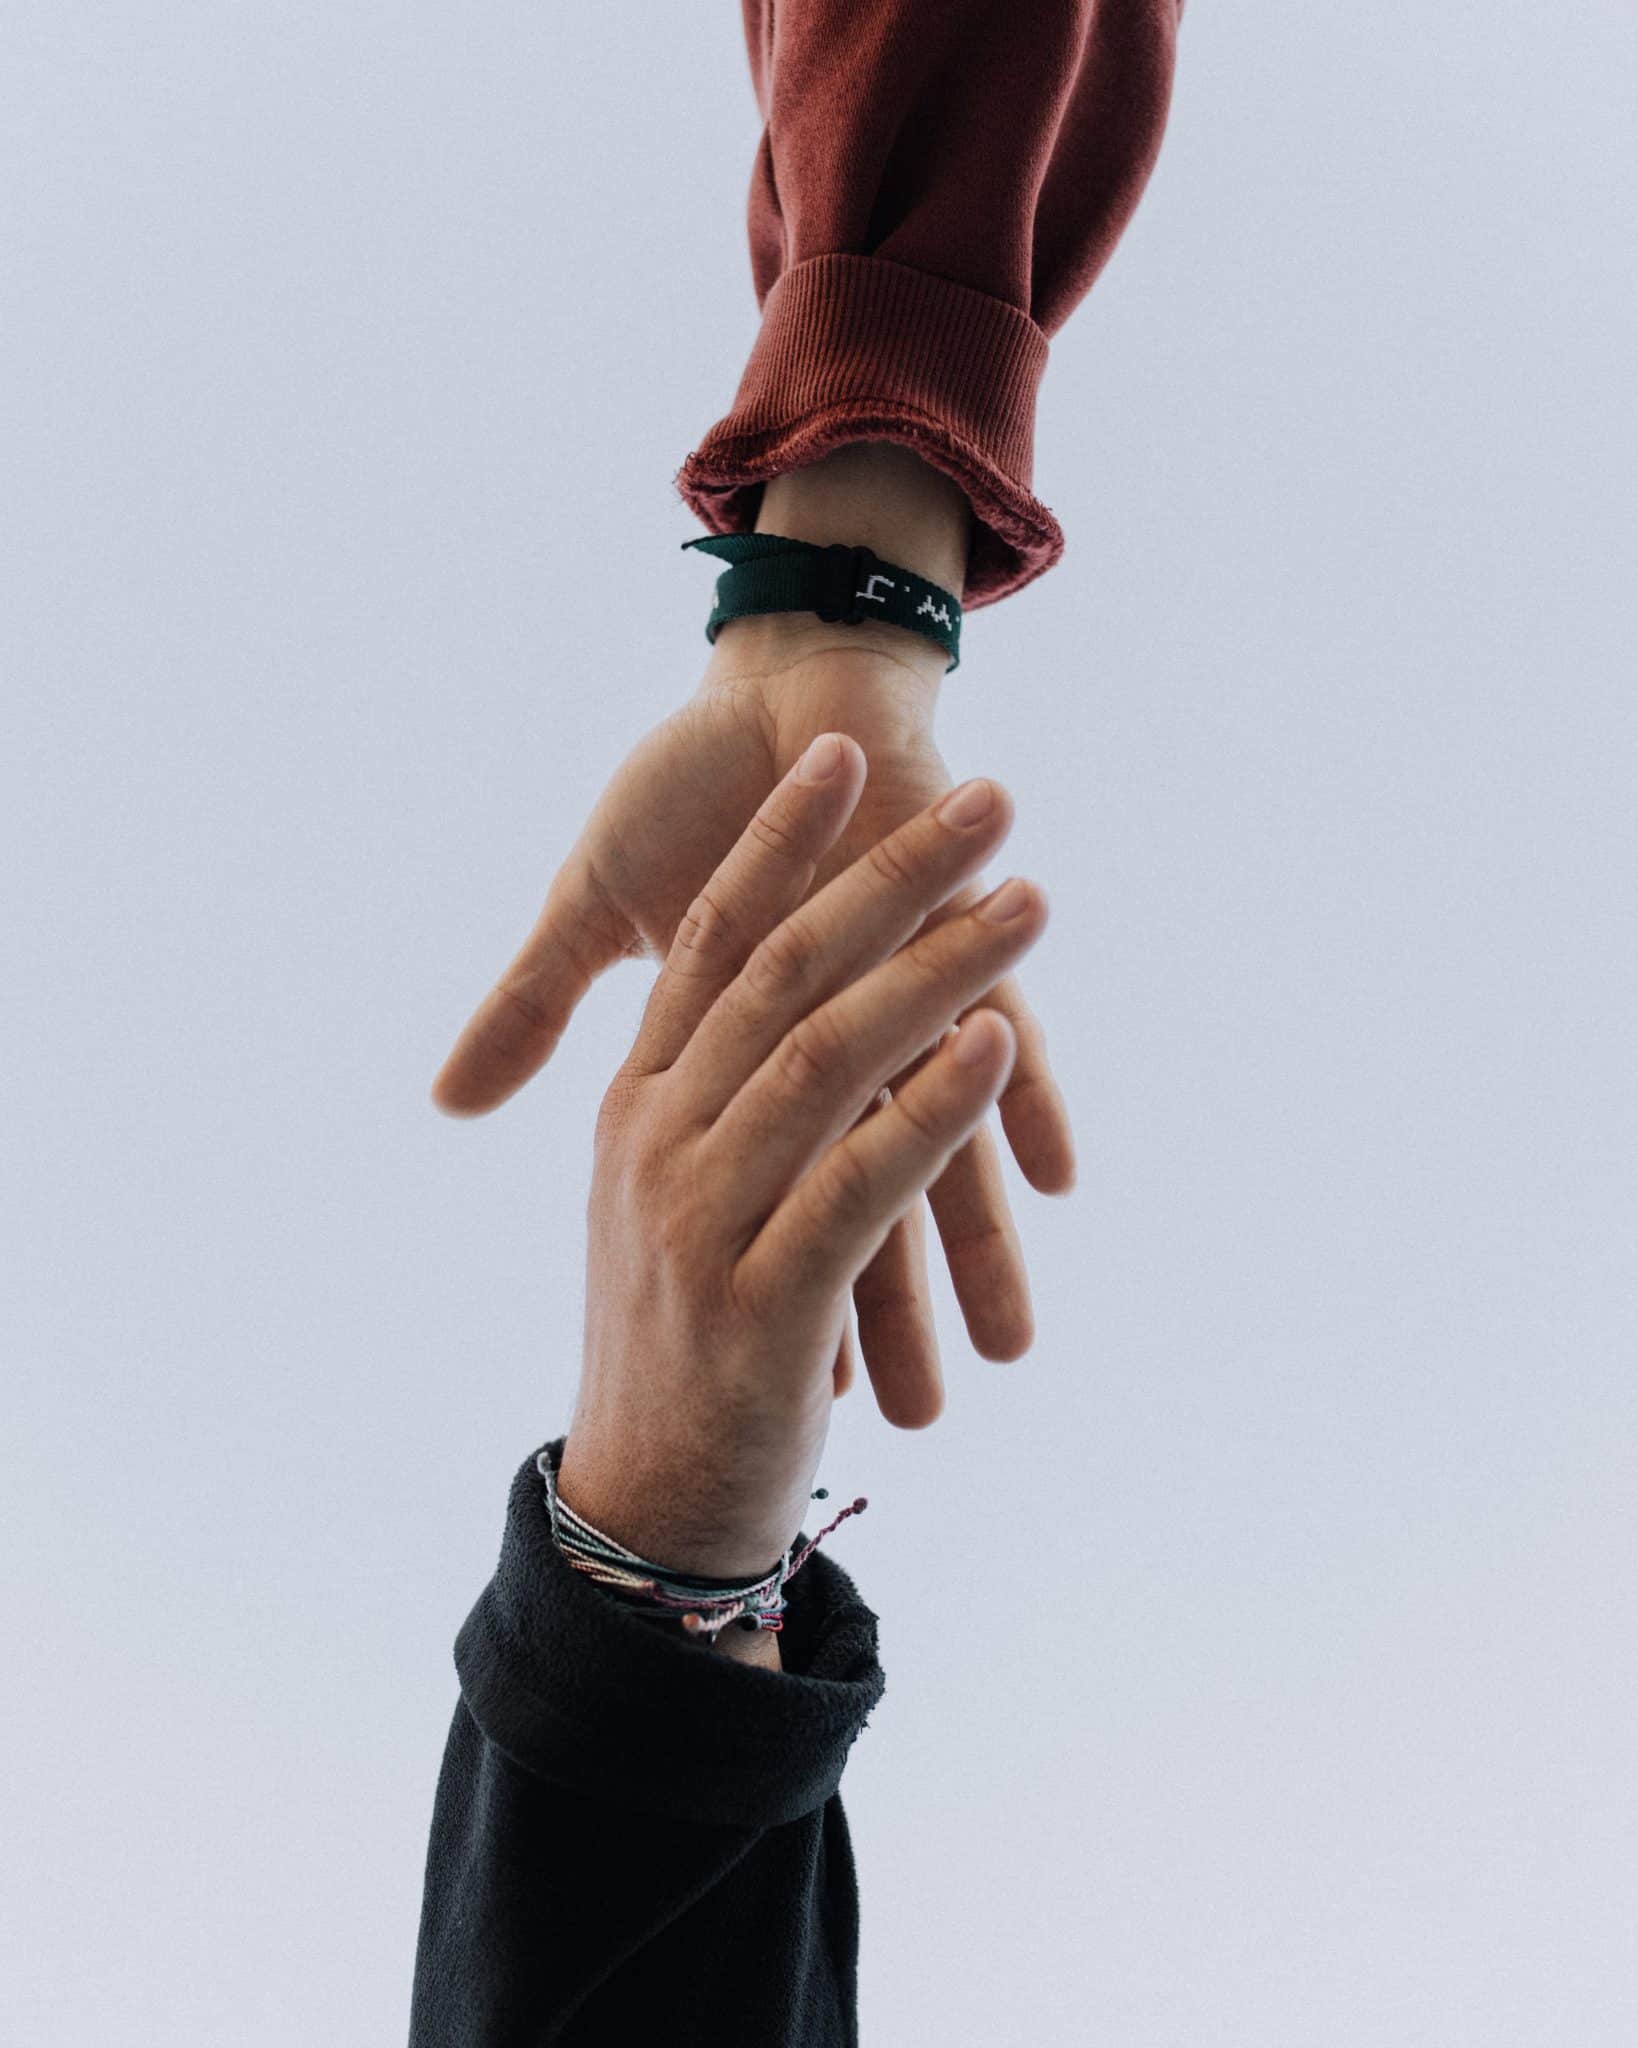 Close-up view of two people's hands reaching out to grasp each other, as if offering their support through anxiety and burnout